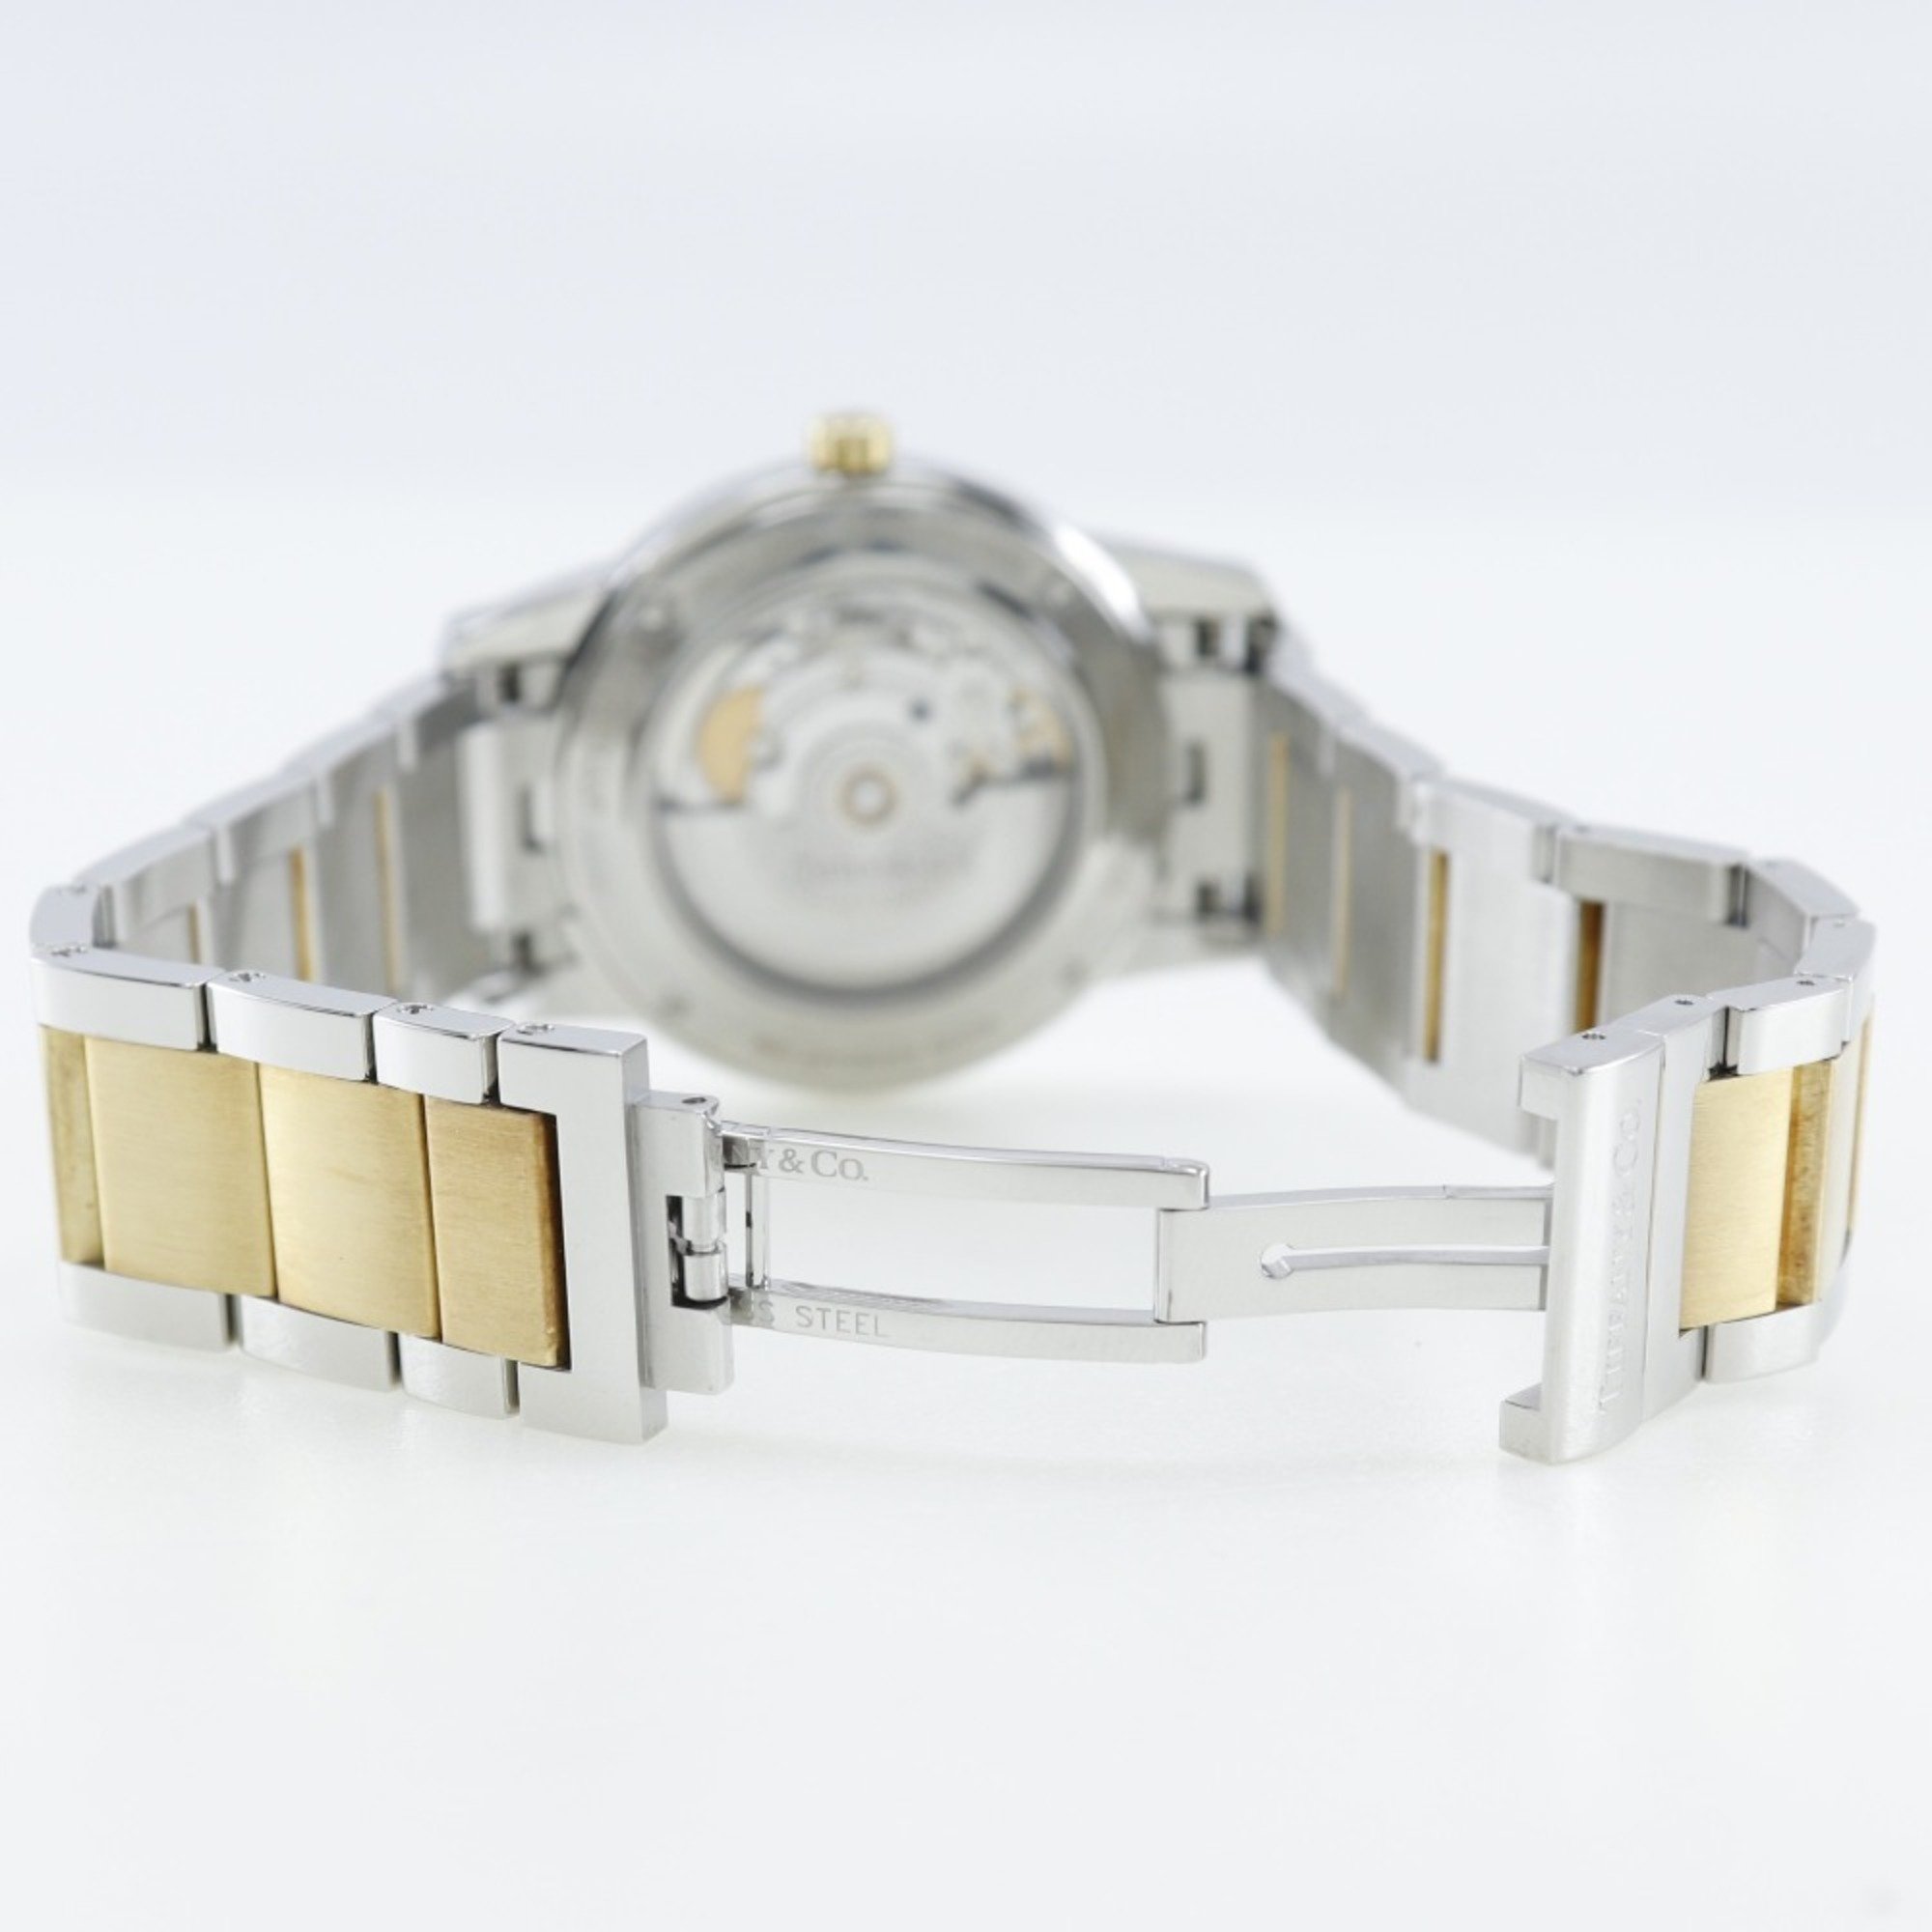 Tiffany TIFFANY&Co. Atlas Dome Watch Gold & Steel Swiss Made Silver/Gold Automatic Winding Analog Display White Dial Men's